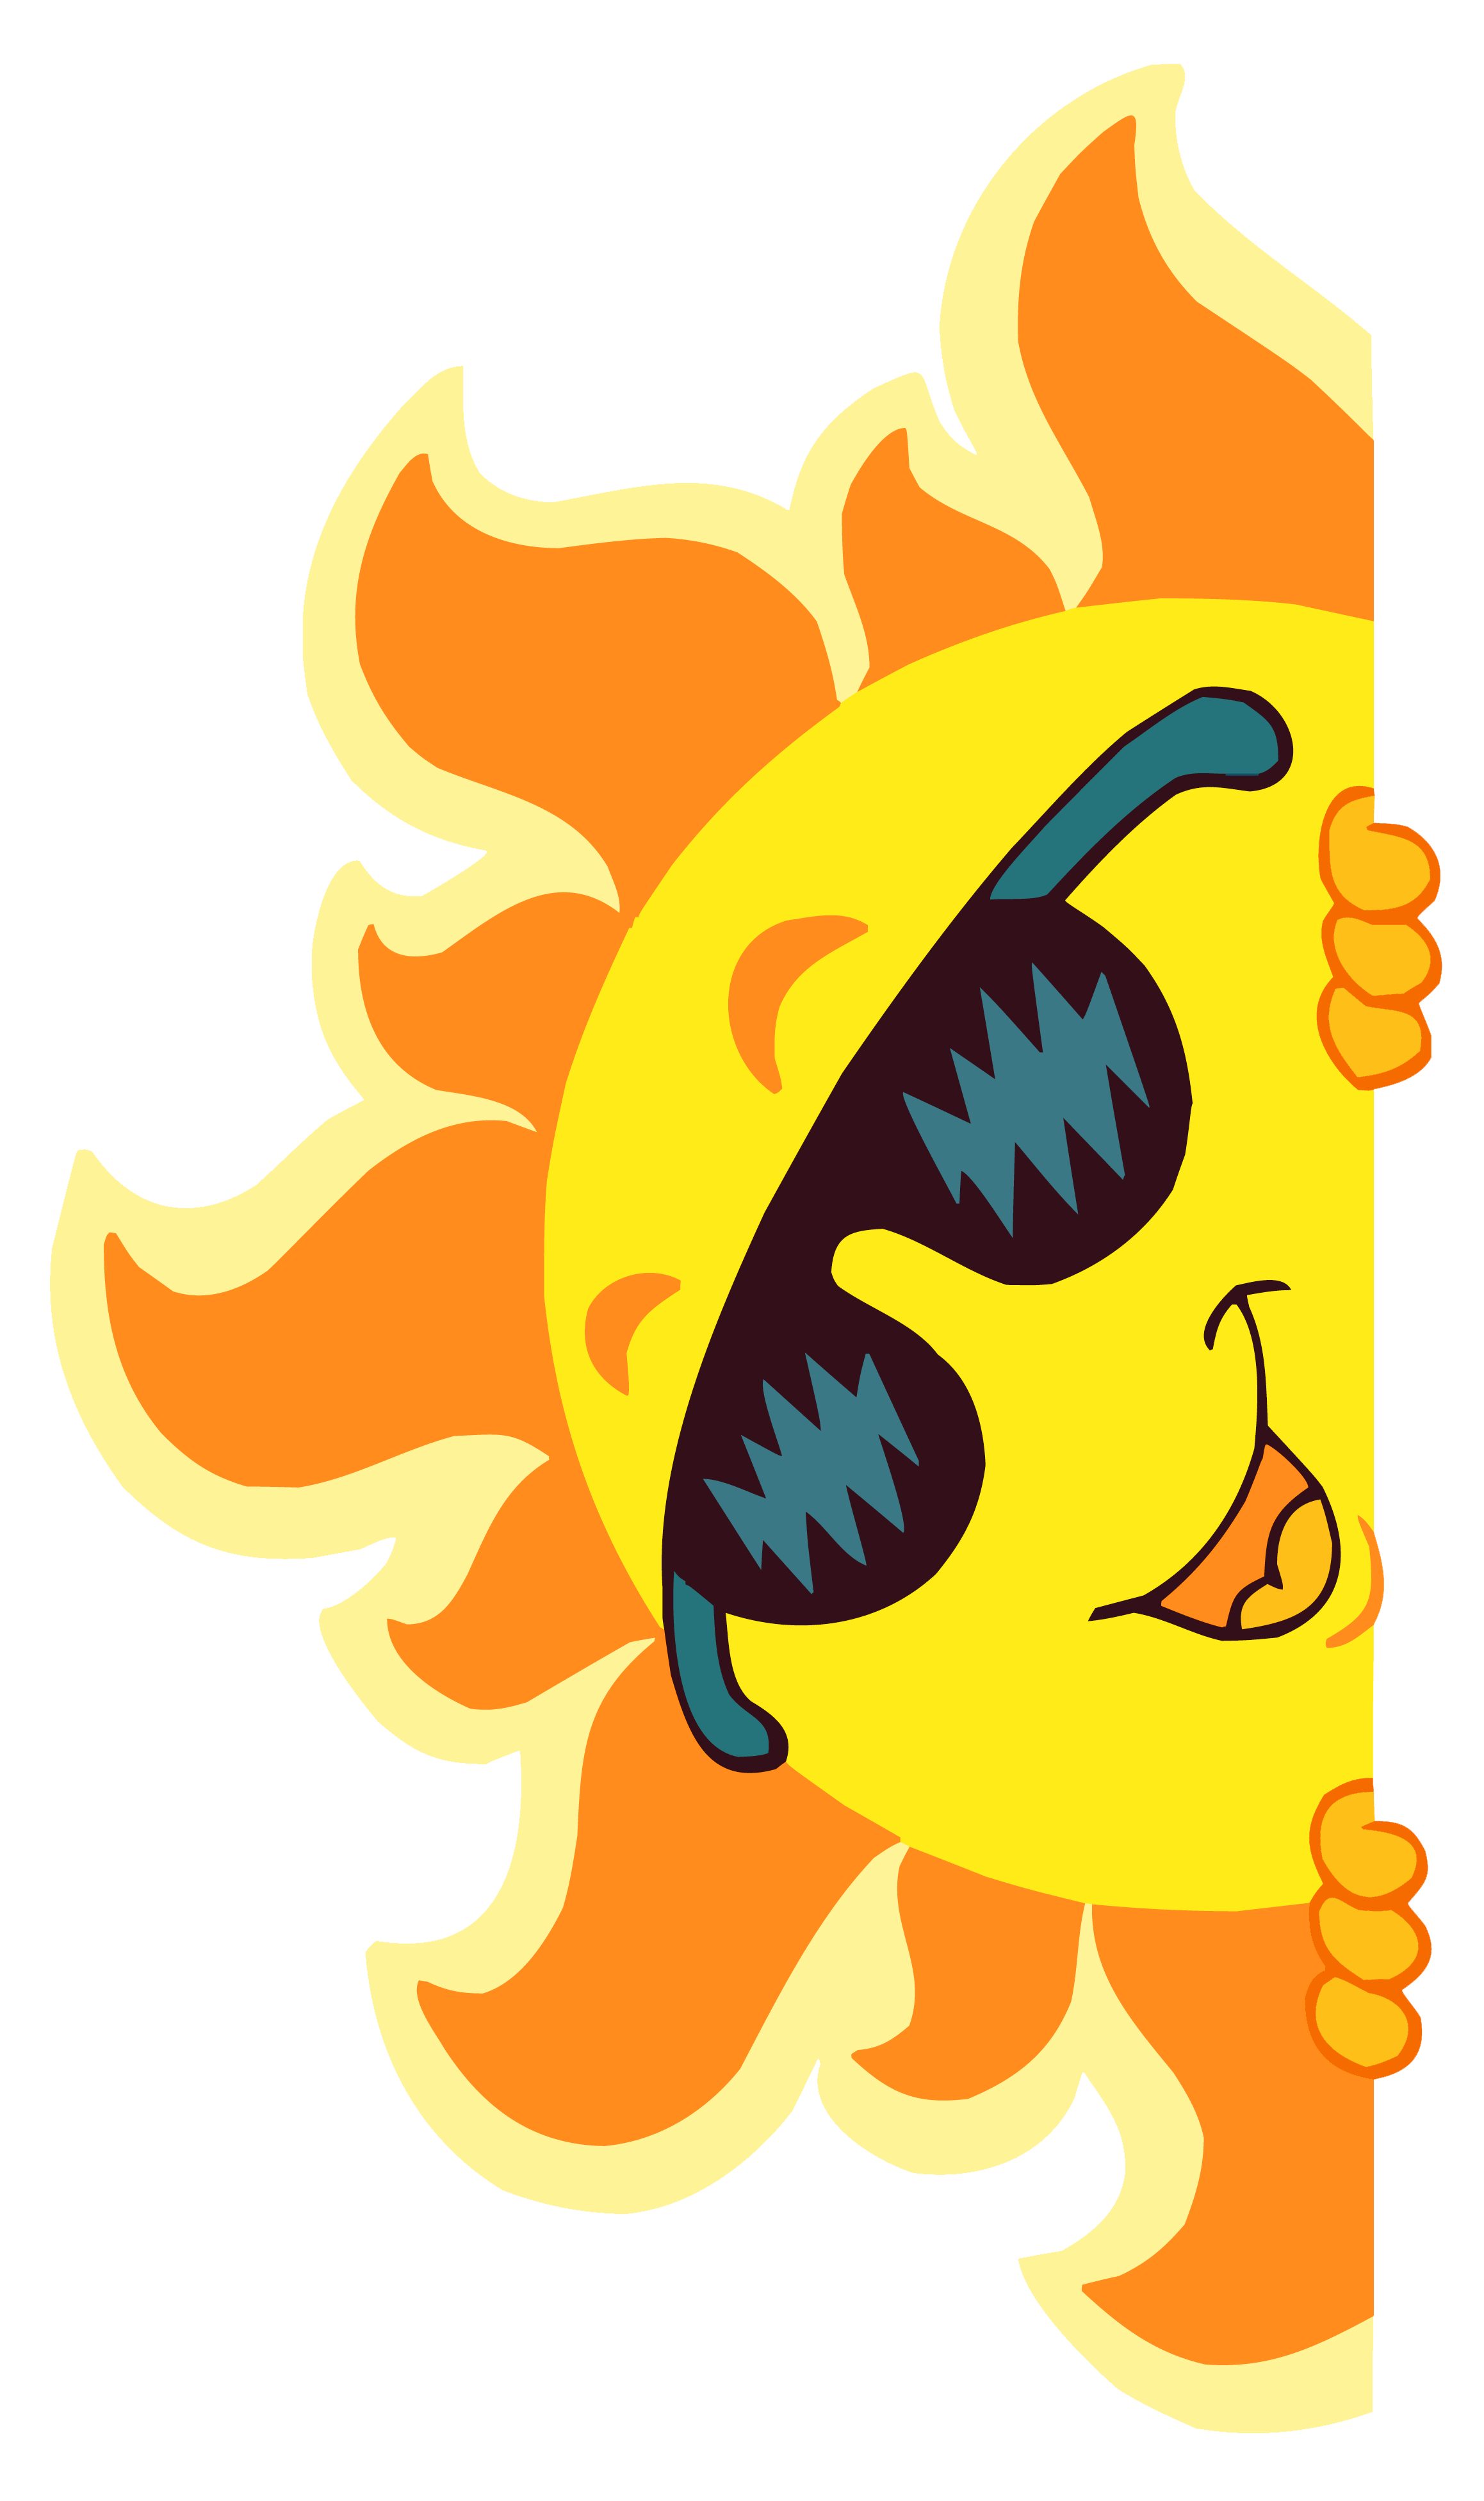 Smiling Sun Png - ClipArt Best